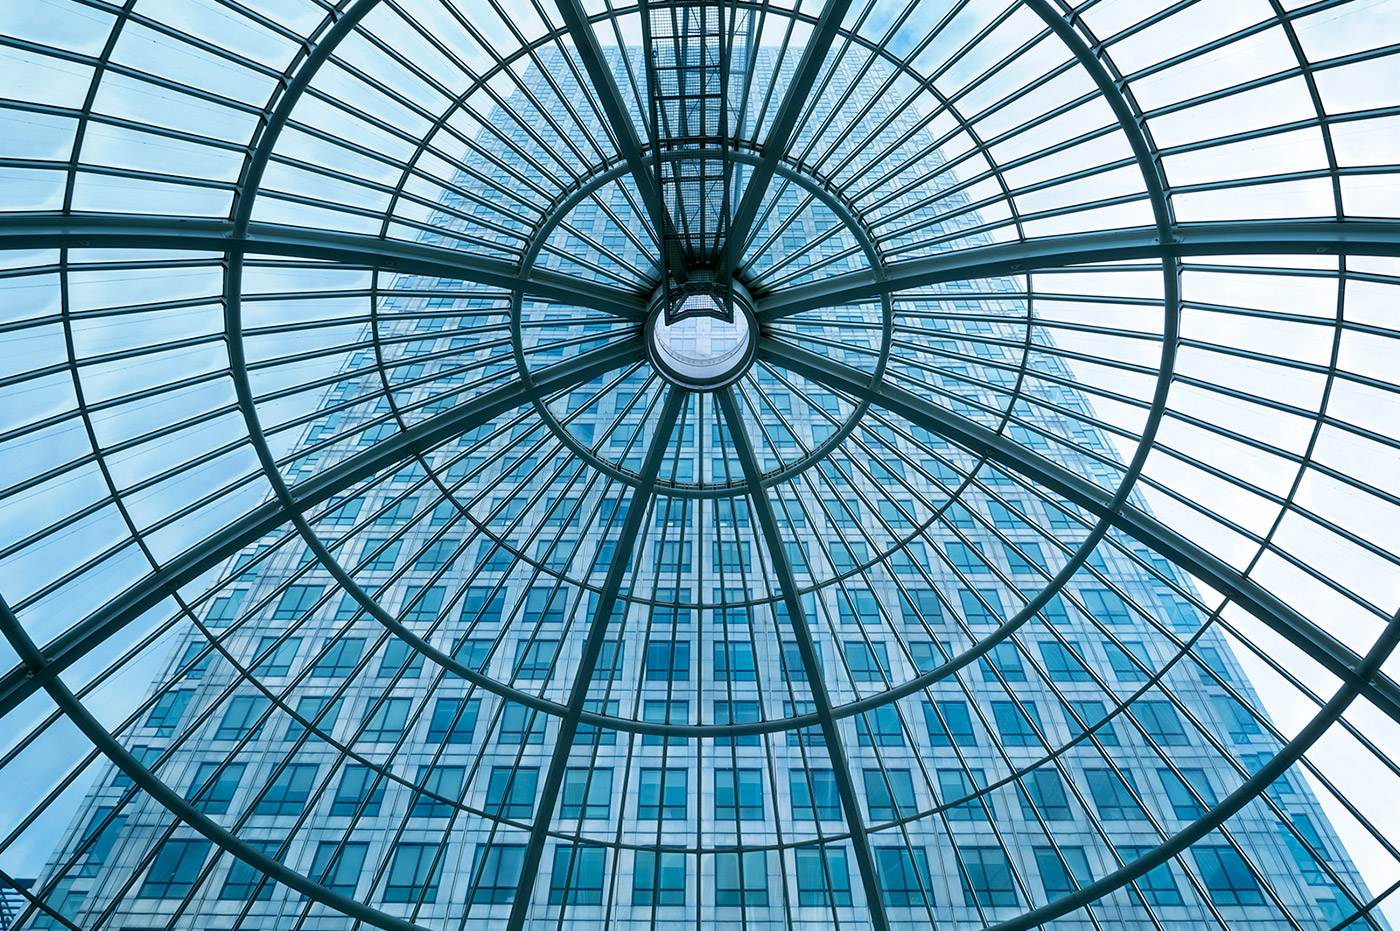 A high-rise building through the view of a glass and steel domed window.